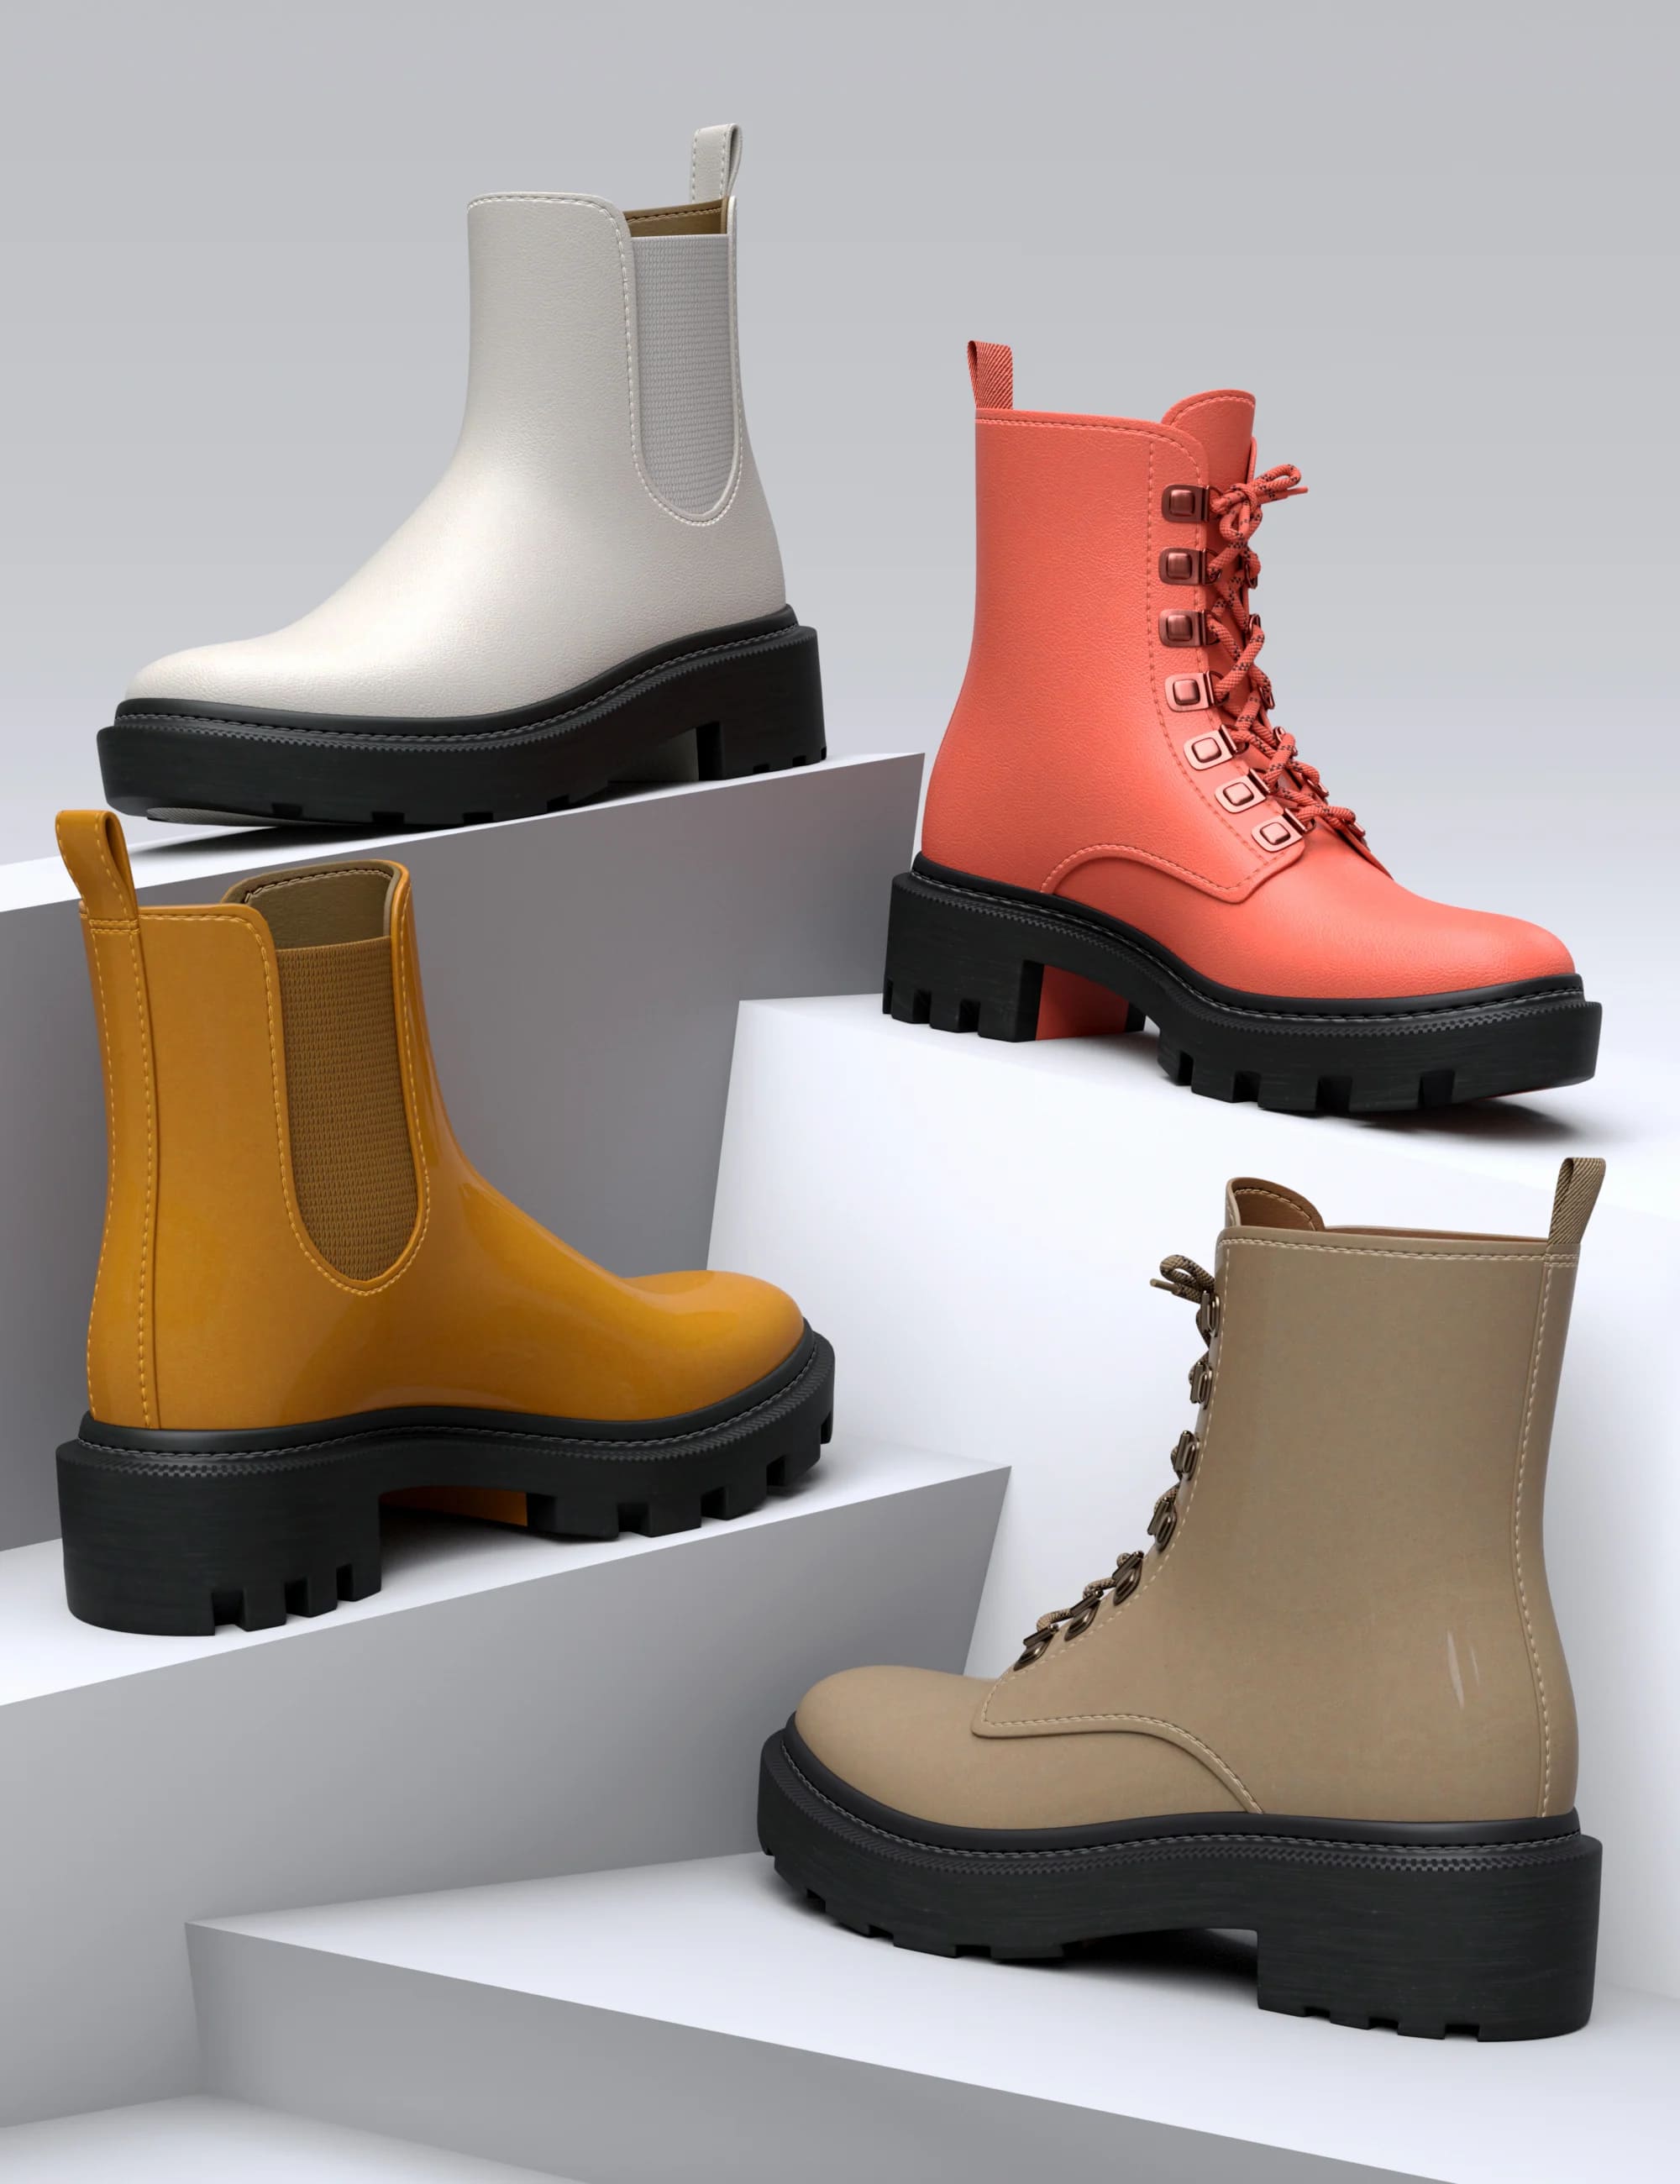 HL Fashion Boots for Genesis 8 and 8.1 Female_DAZ3D下载站